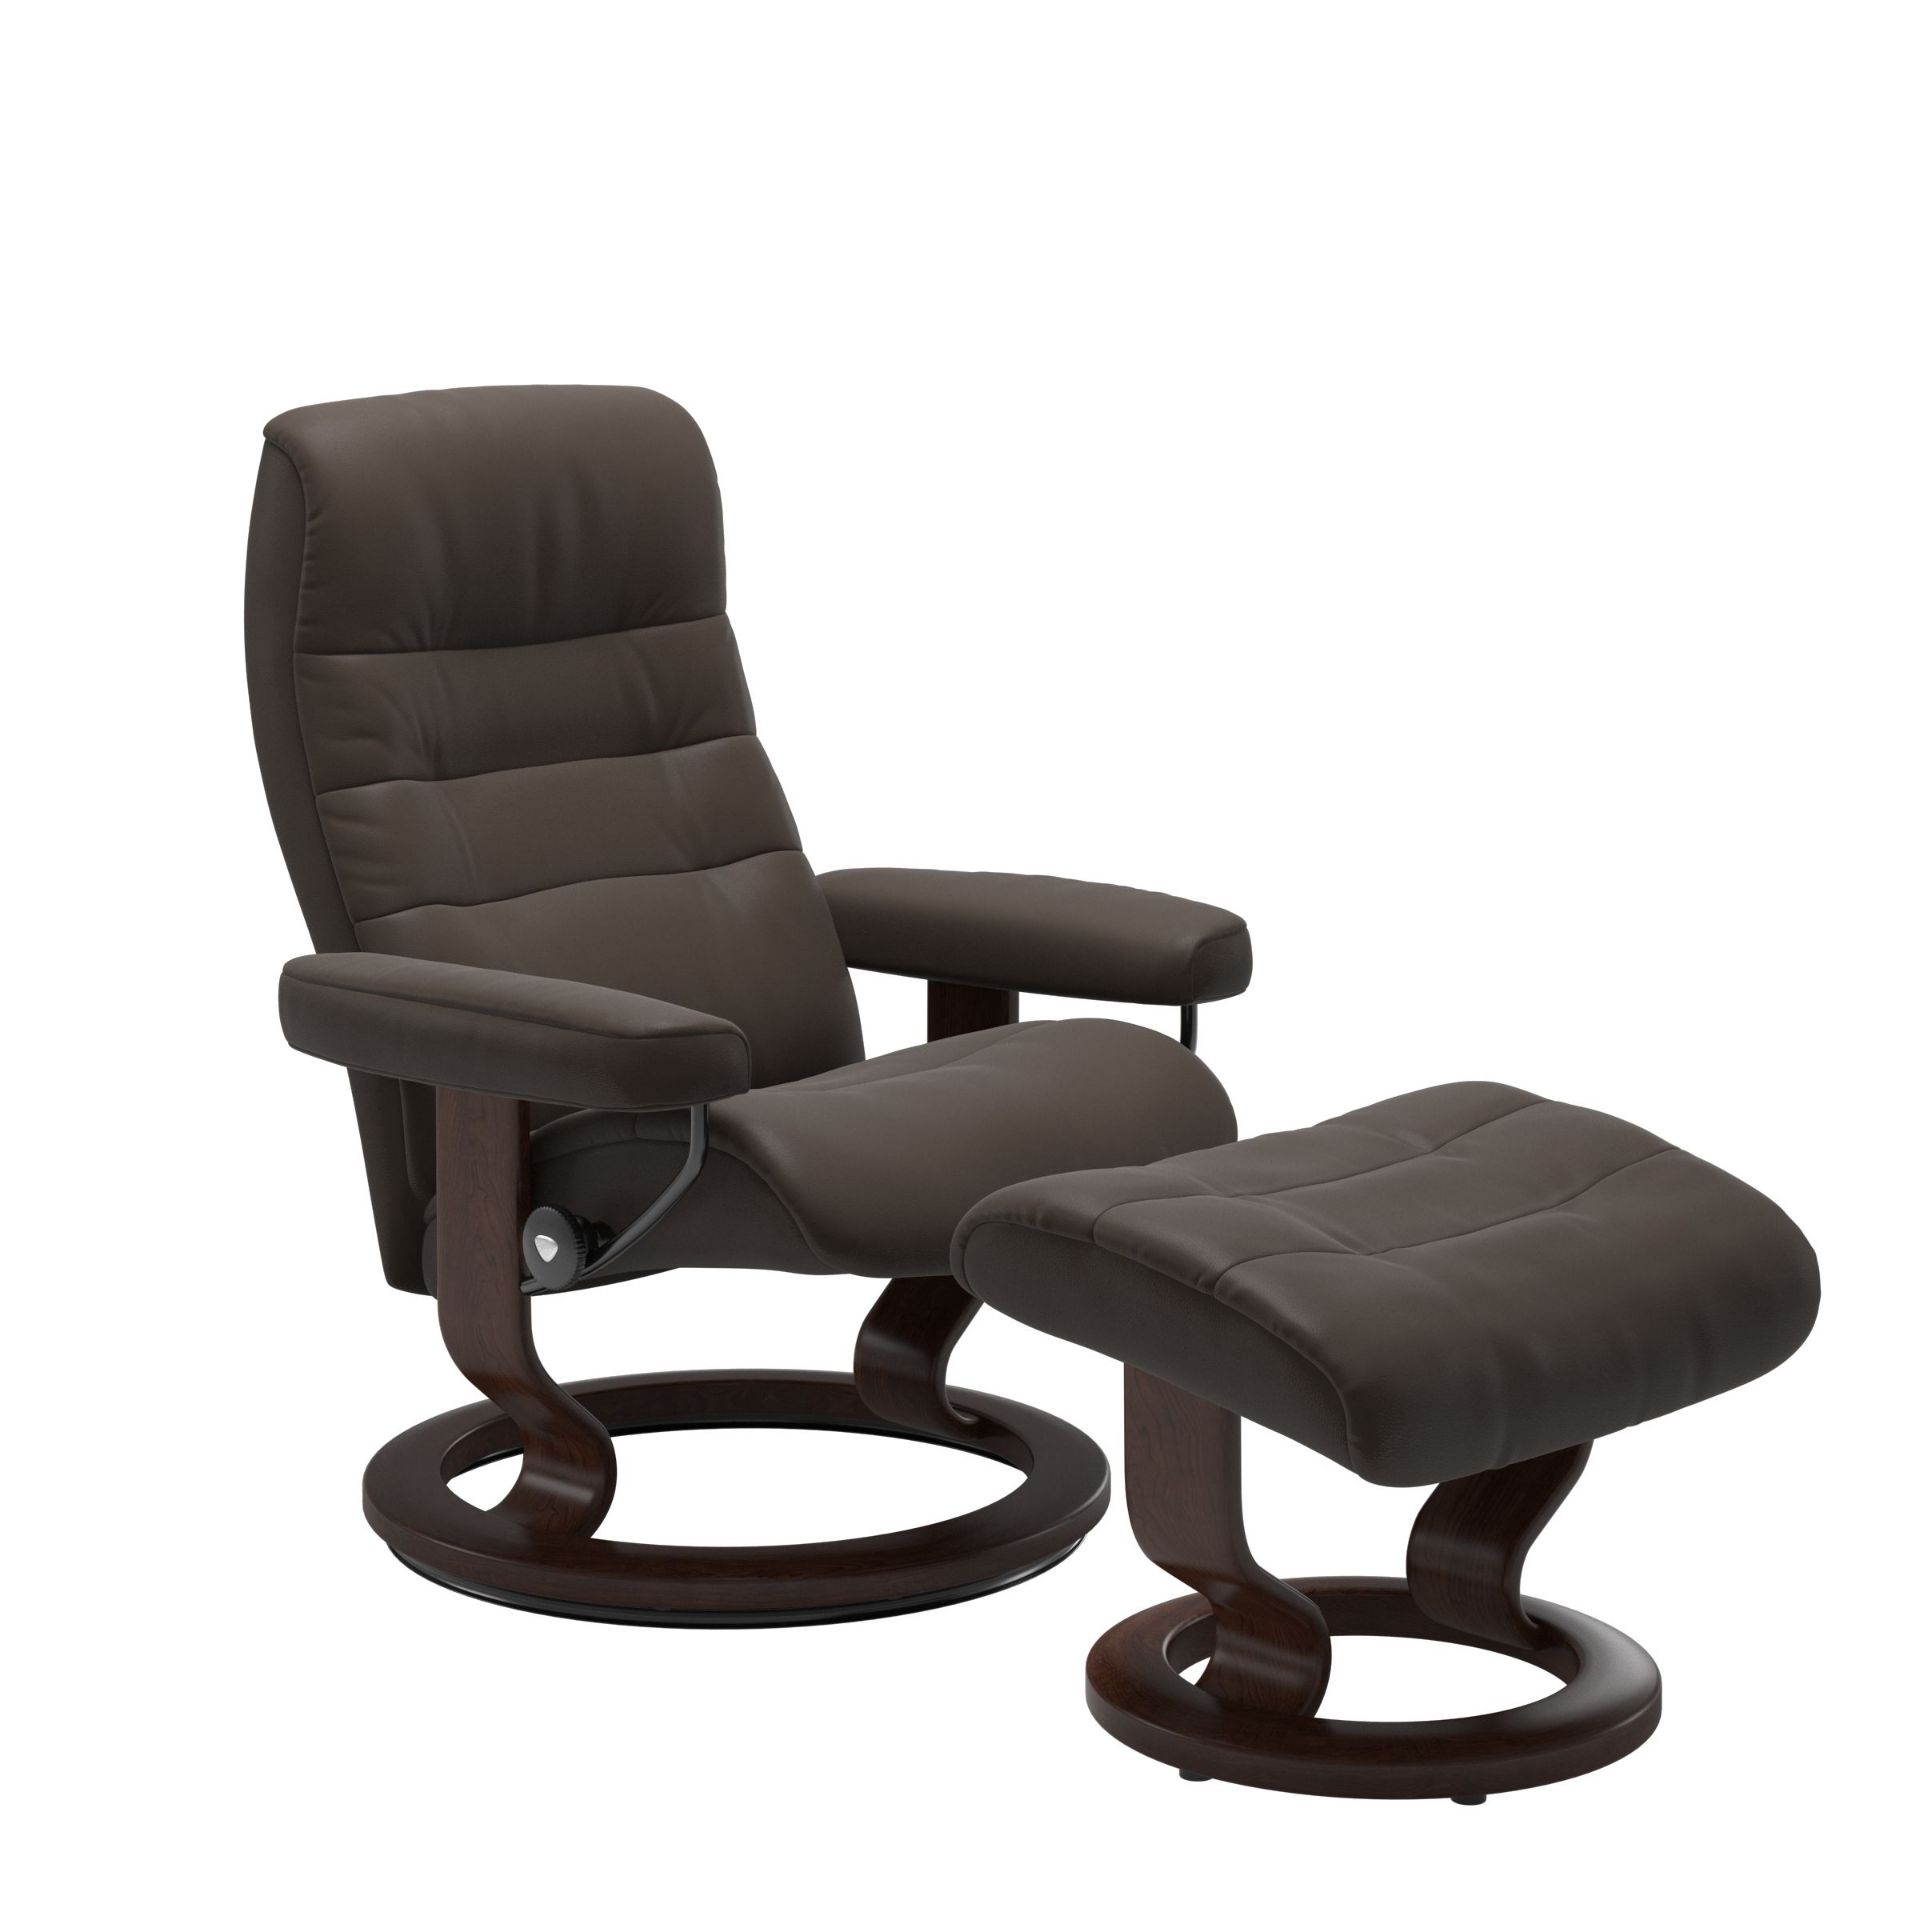 Stressless Opal Small Classic Chair and Stool in Batick Brown with Brown Stain RRP 1729About the